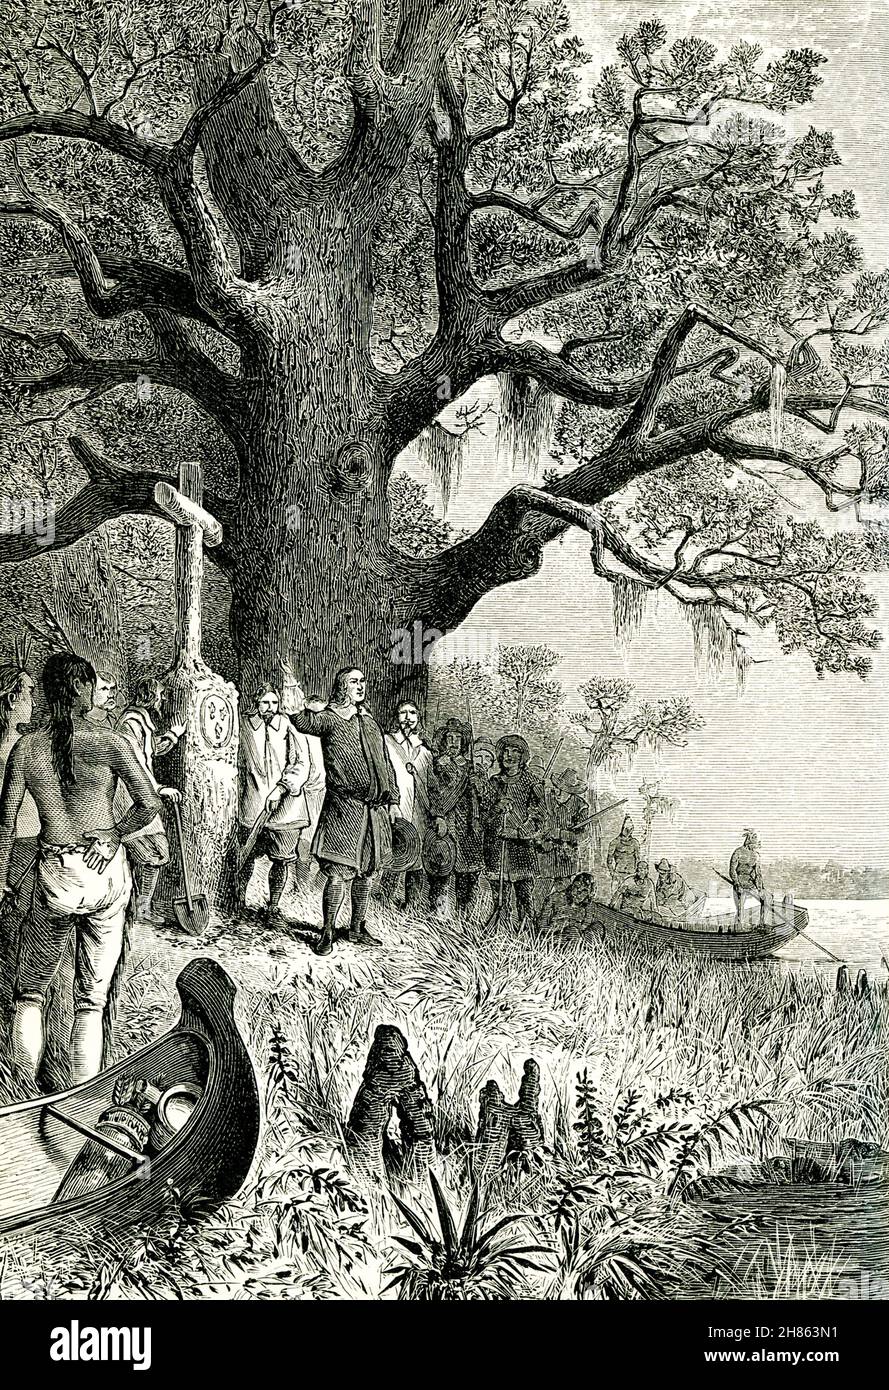 This 1890 illustration shows LaSalle proclaiming French Empire in America. René-Robert Cavelier, Sieur de La Salle was a 17th-century French explorer and fur trader in North America. He explored the Great Lakes region of the United States and Canada, the Mississippi River, and the Gulf of Mexico. ed an expedition down the Illinois and Mississippi rivers and claimed all the region watered by the Mississippi and its tributaries for Louis XIV of France, naming the region “Louisiana.” Stock Photo